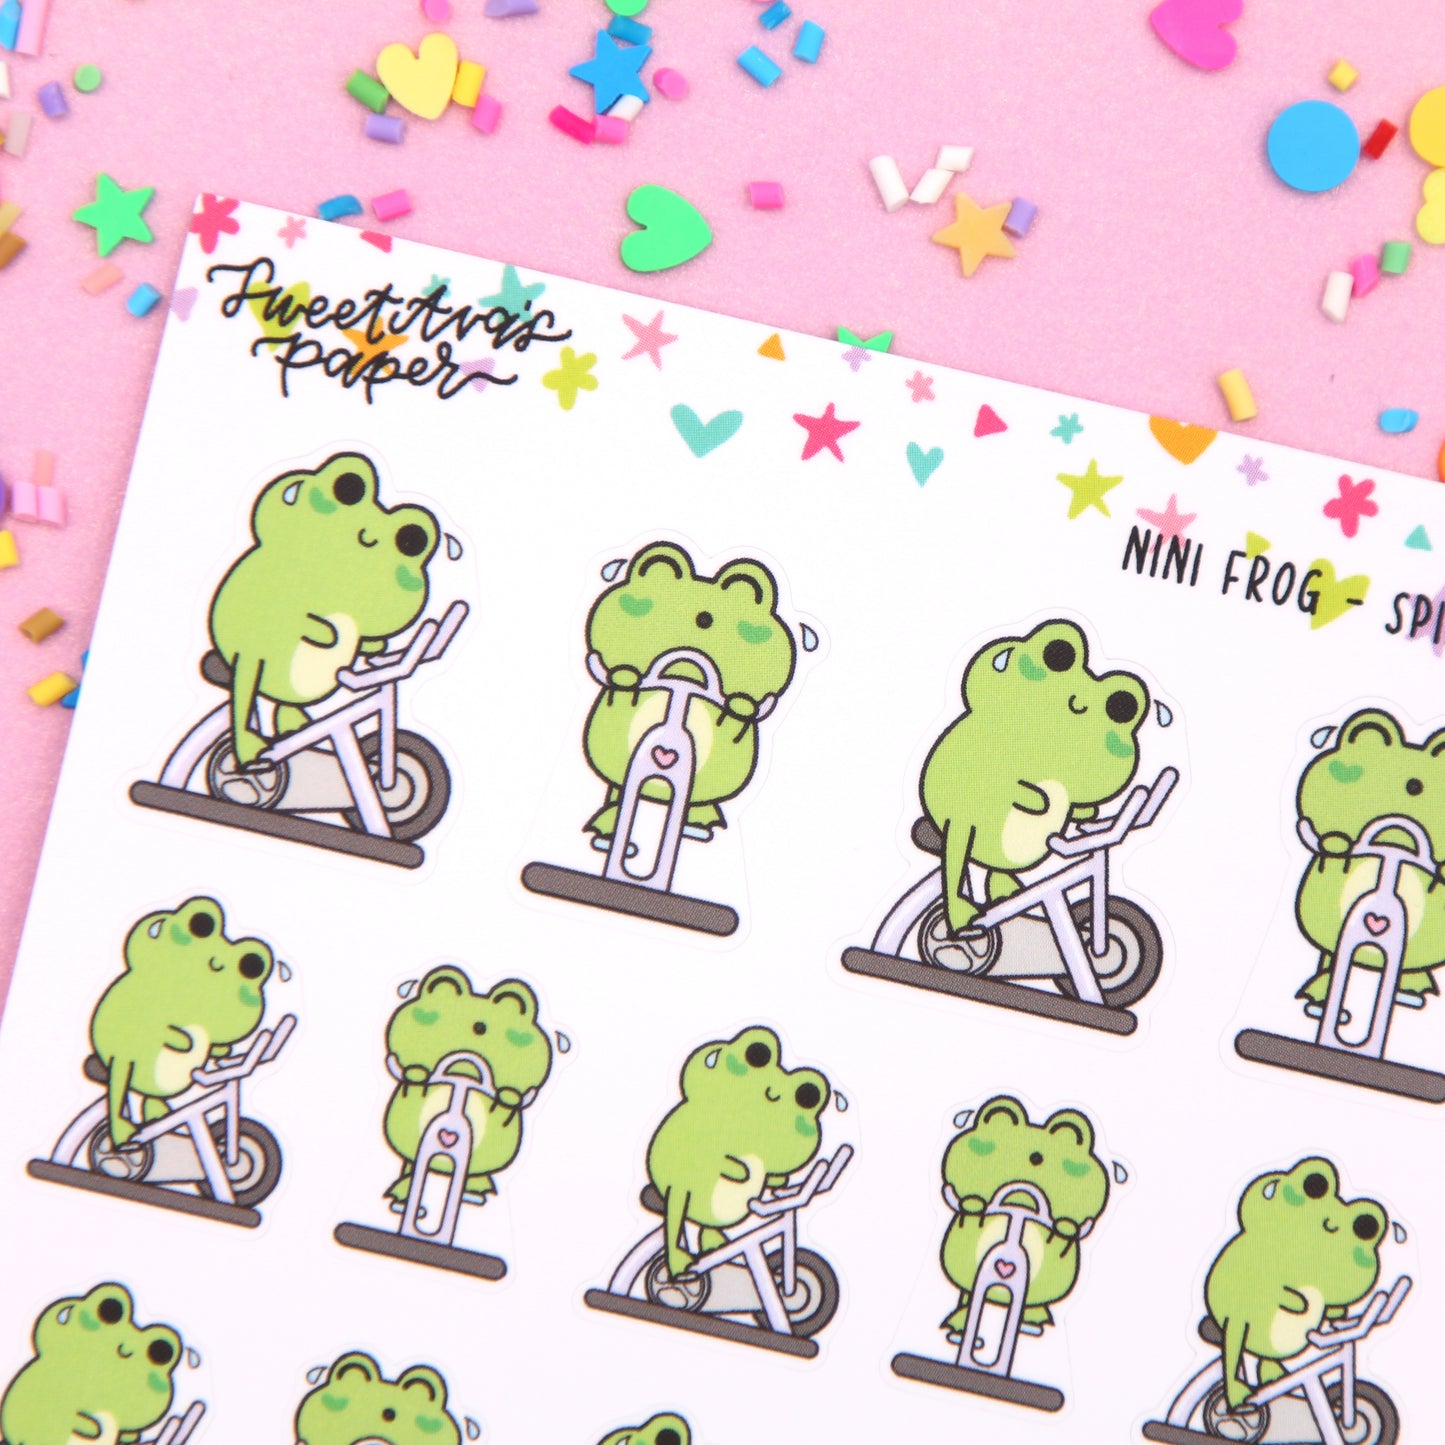 Exercise Bike Planner Stickers - Spin Class Planner Stickers - Workout Planner Stickers - Character Planner Stickers - Nini Frog - [1448]